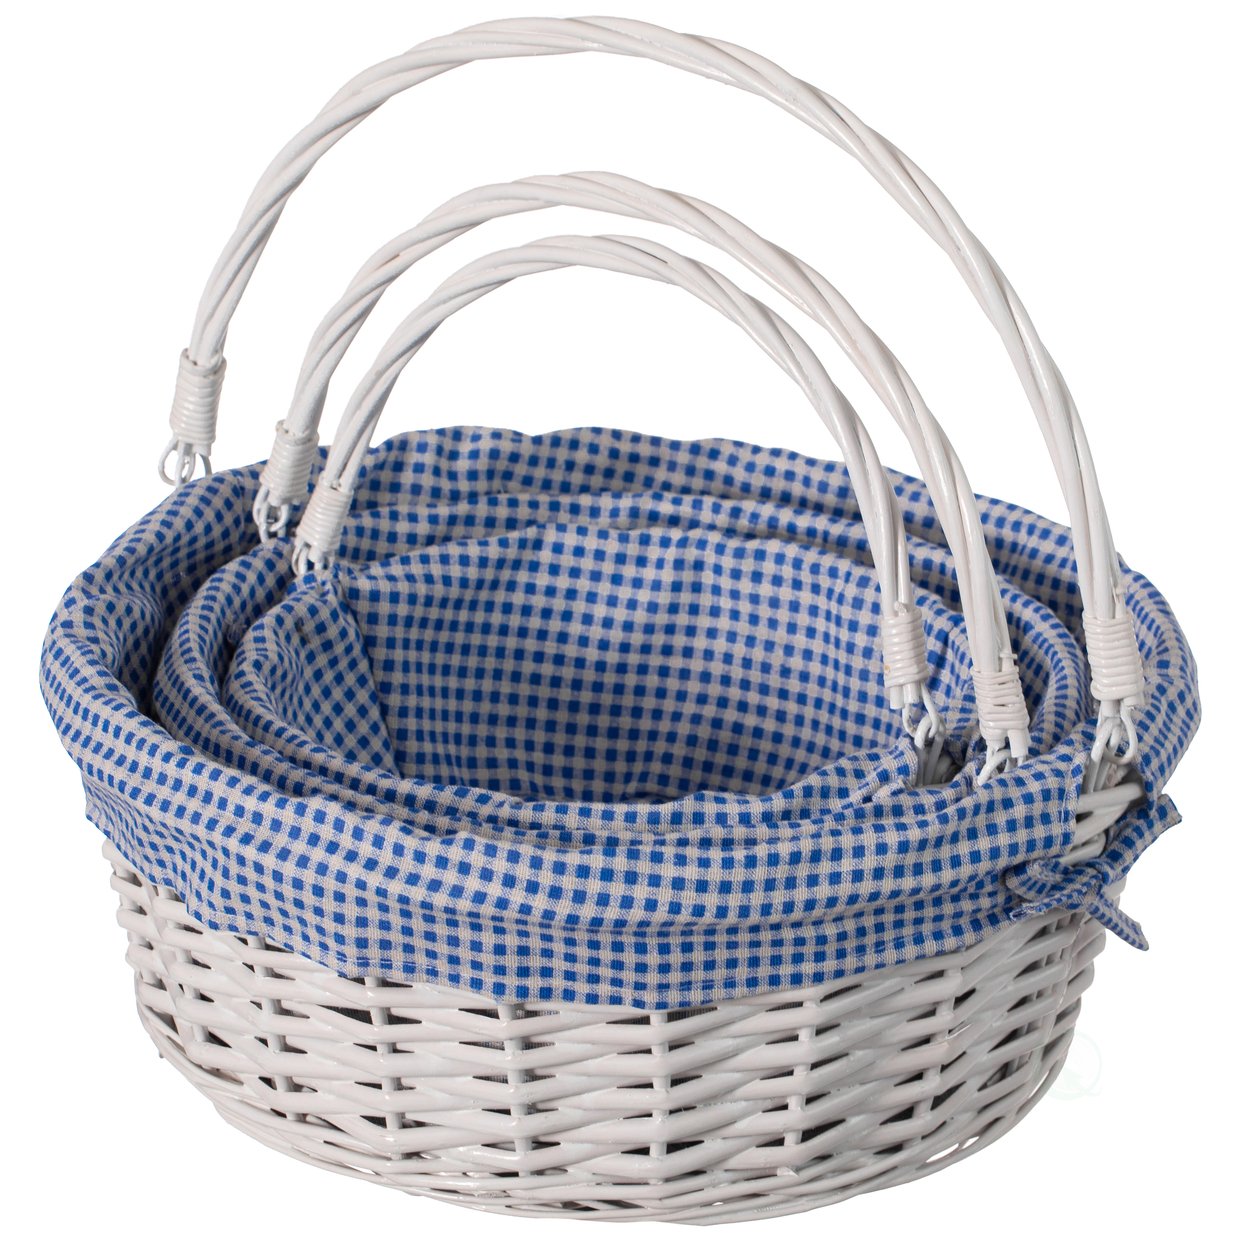 Traditional White Round Willow Gift Basket With Gingham Liner And Sturdy Foldable Handles, Food Snacks Storage Basket - Pink, Small